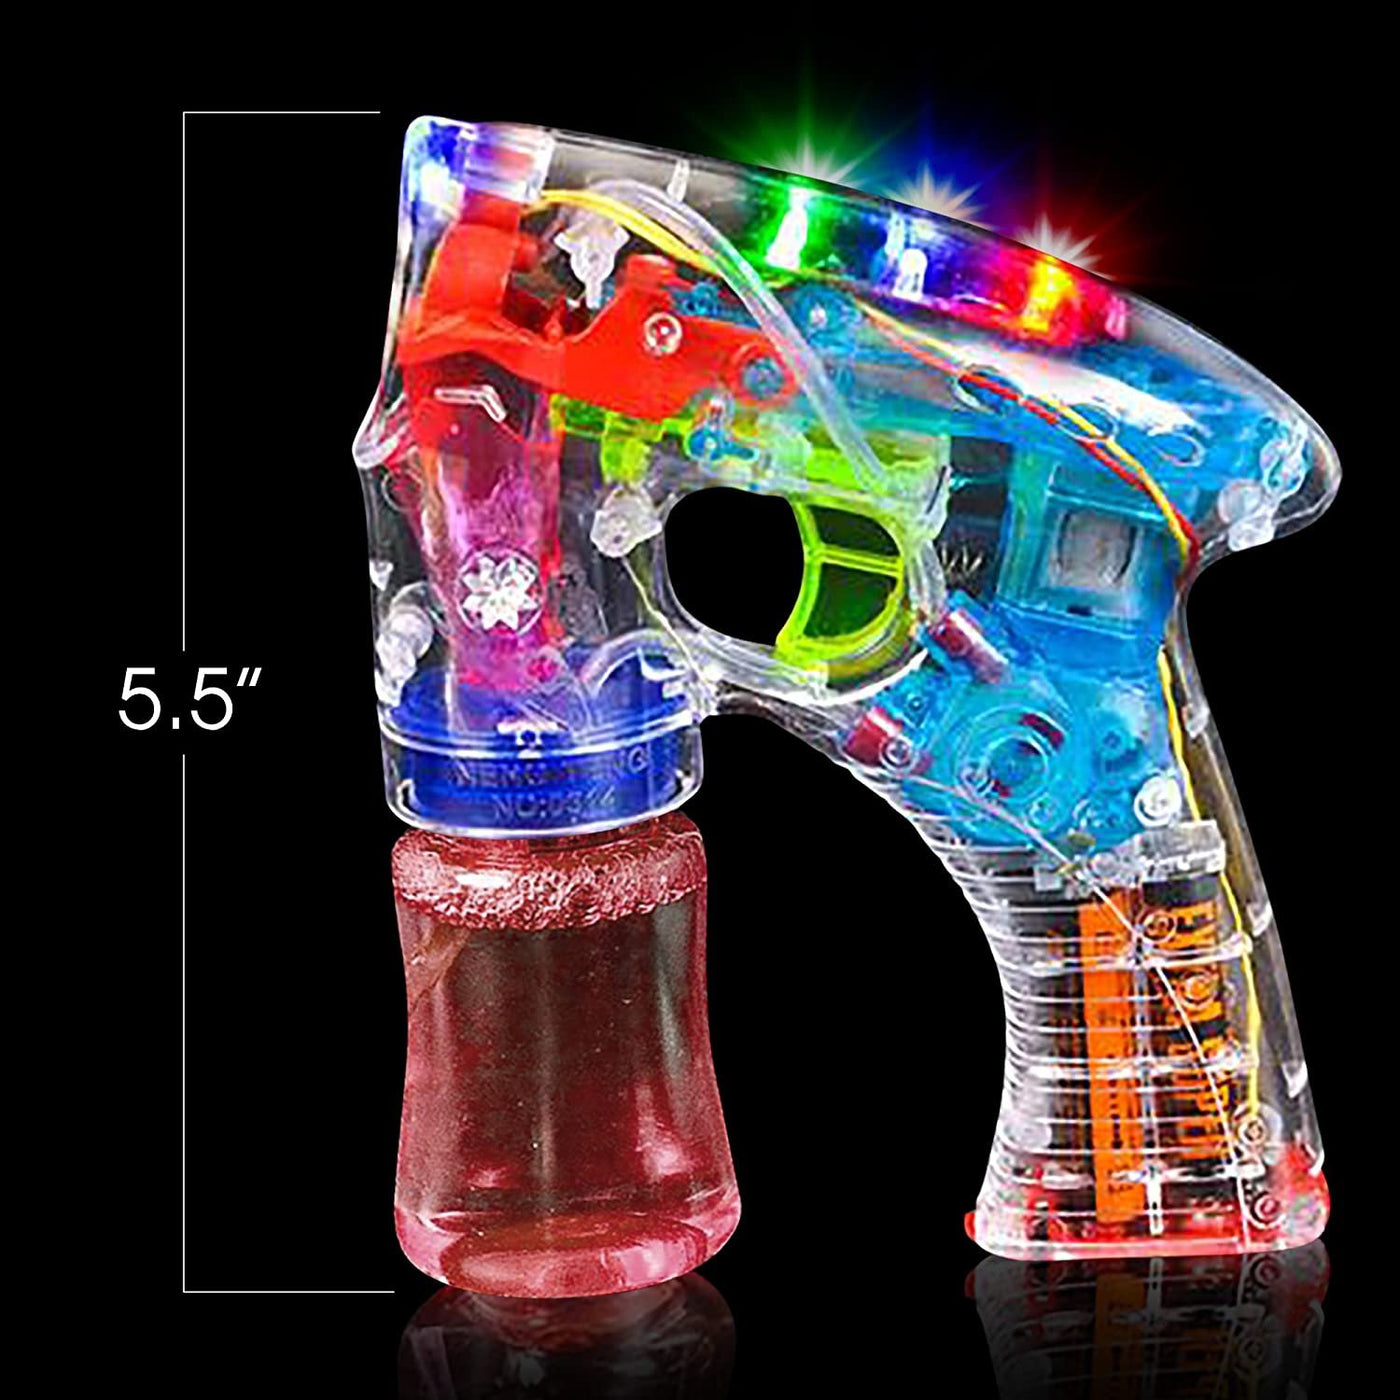 Light Up Bubble Gun - Medium Lightweight Design - Perfect for Summertime - Fun, Engaging, and Entertaining - Party Favor, Amazing Gift Idea for Boys and Girls - Batteries Included